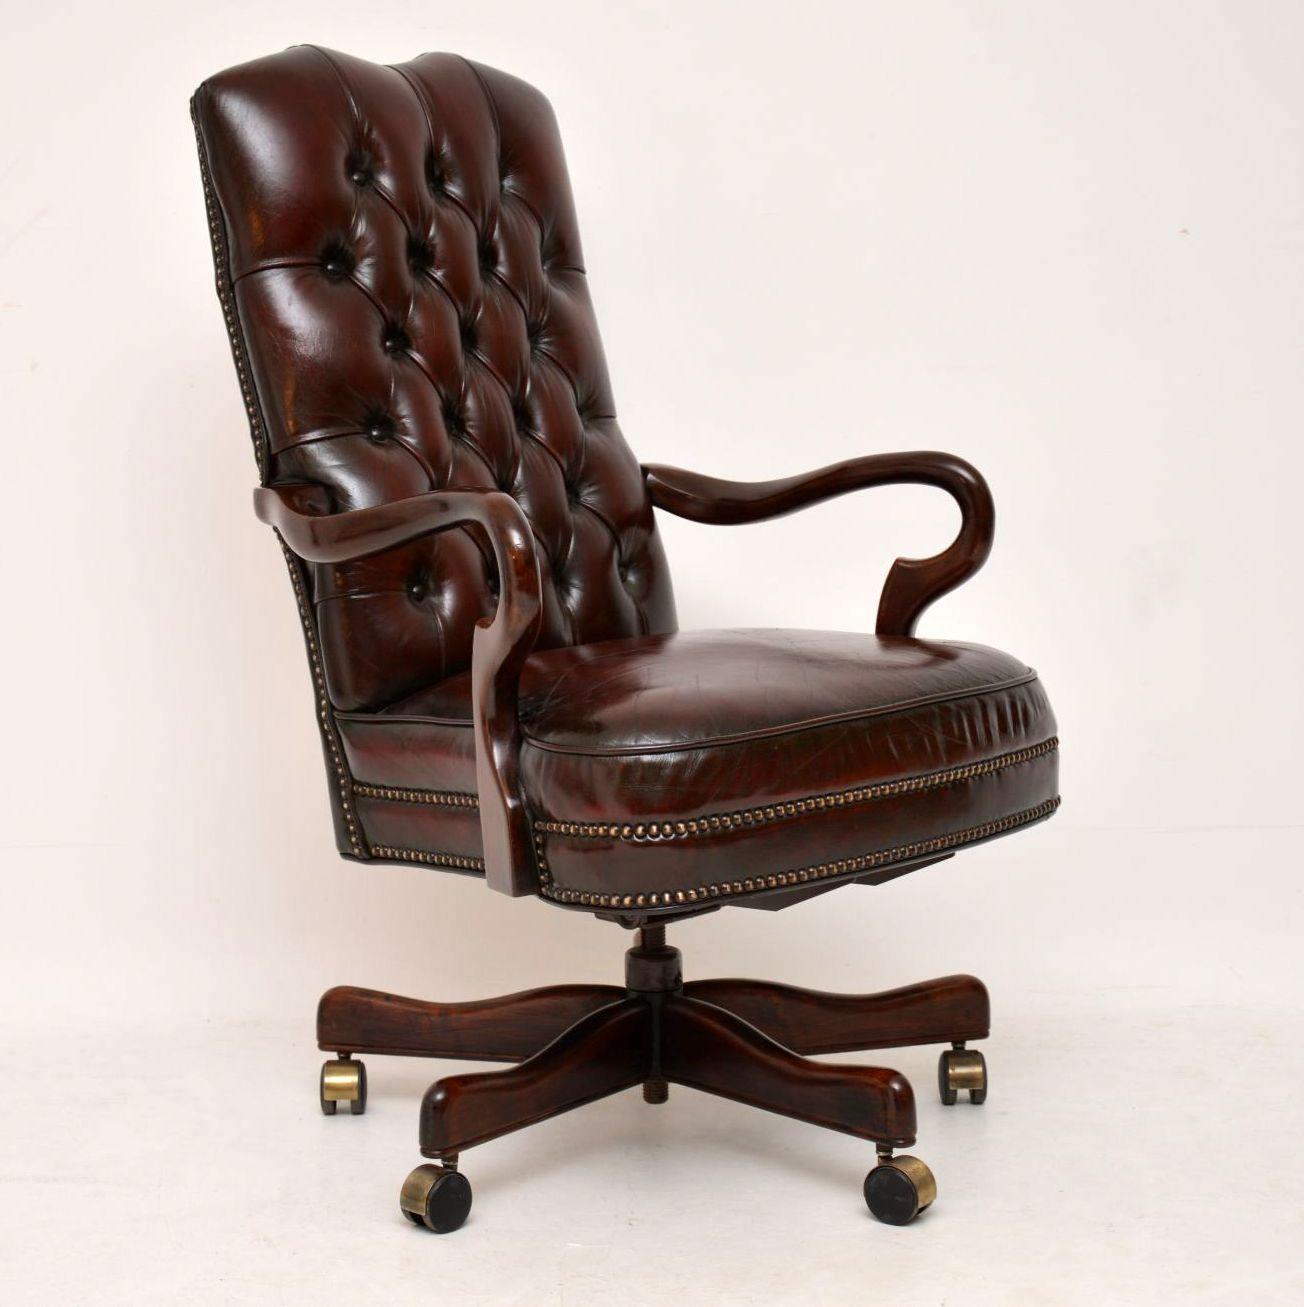 Victorian Antique Leather & Mahogany Swivel Desk Chair